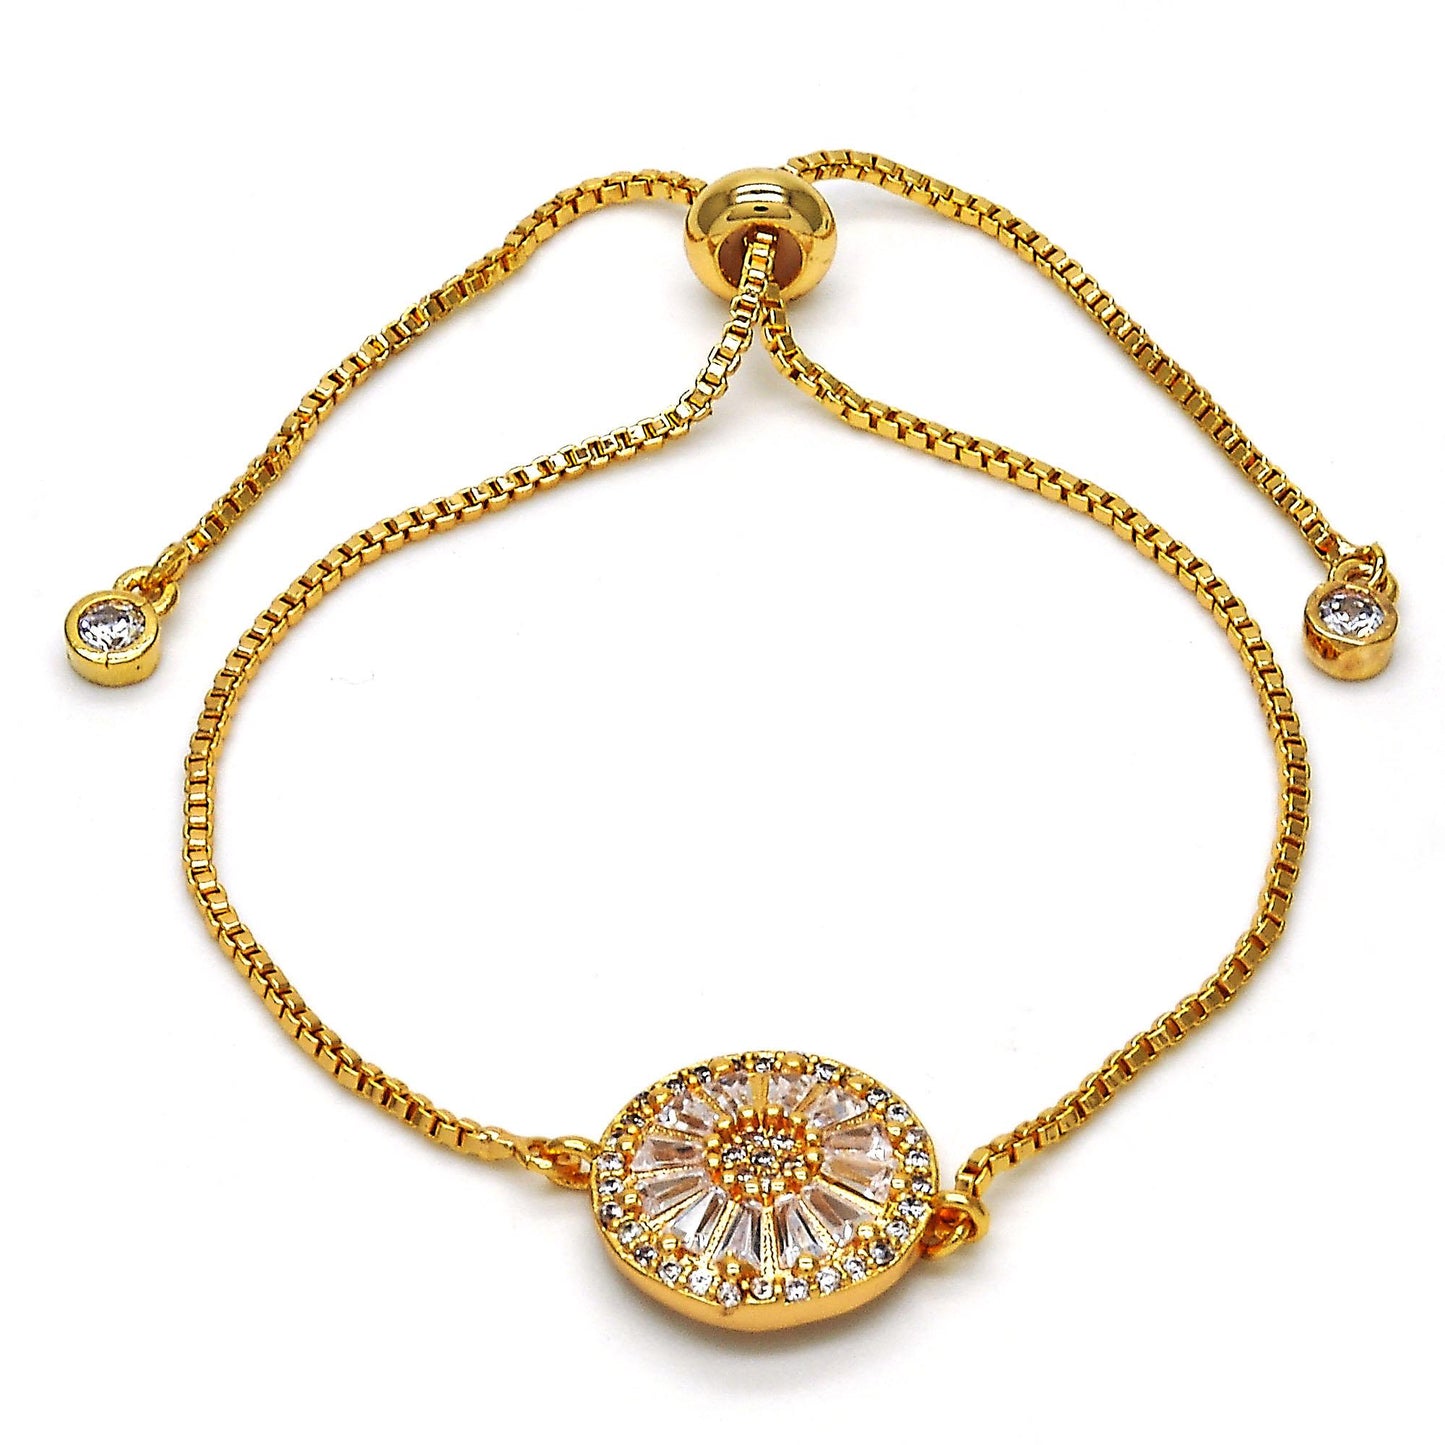 14.1mm Polished 14k Yellow Gold Plated Clear Cubic Zirconia Bolo Bracelet, 10 inches (SKU: GL-B1020)